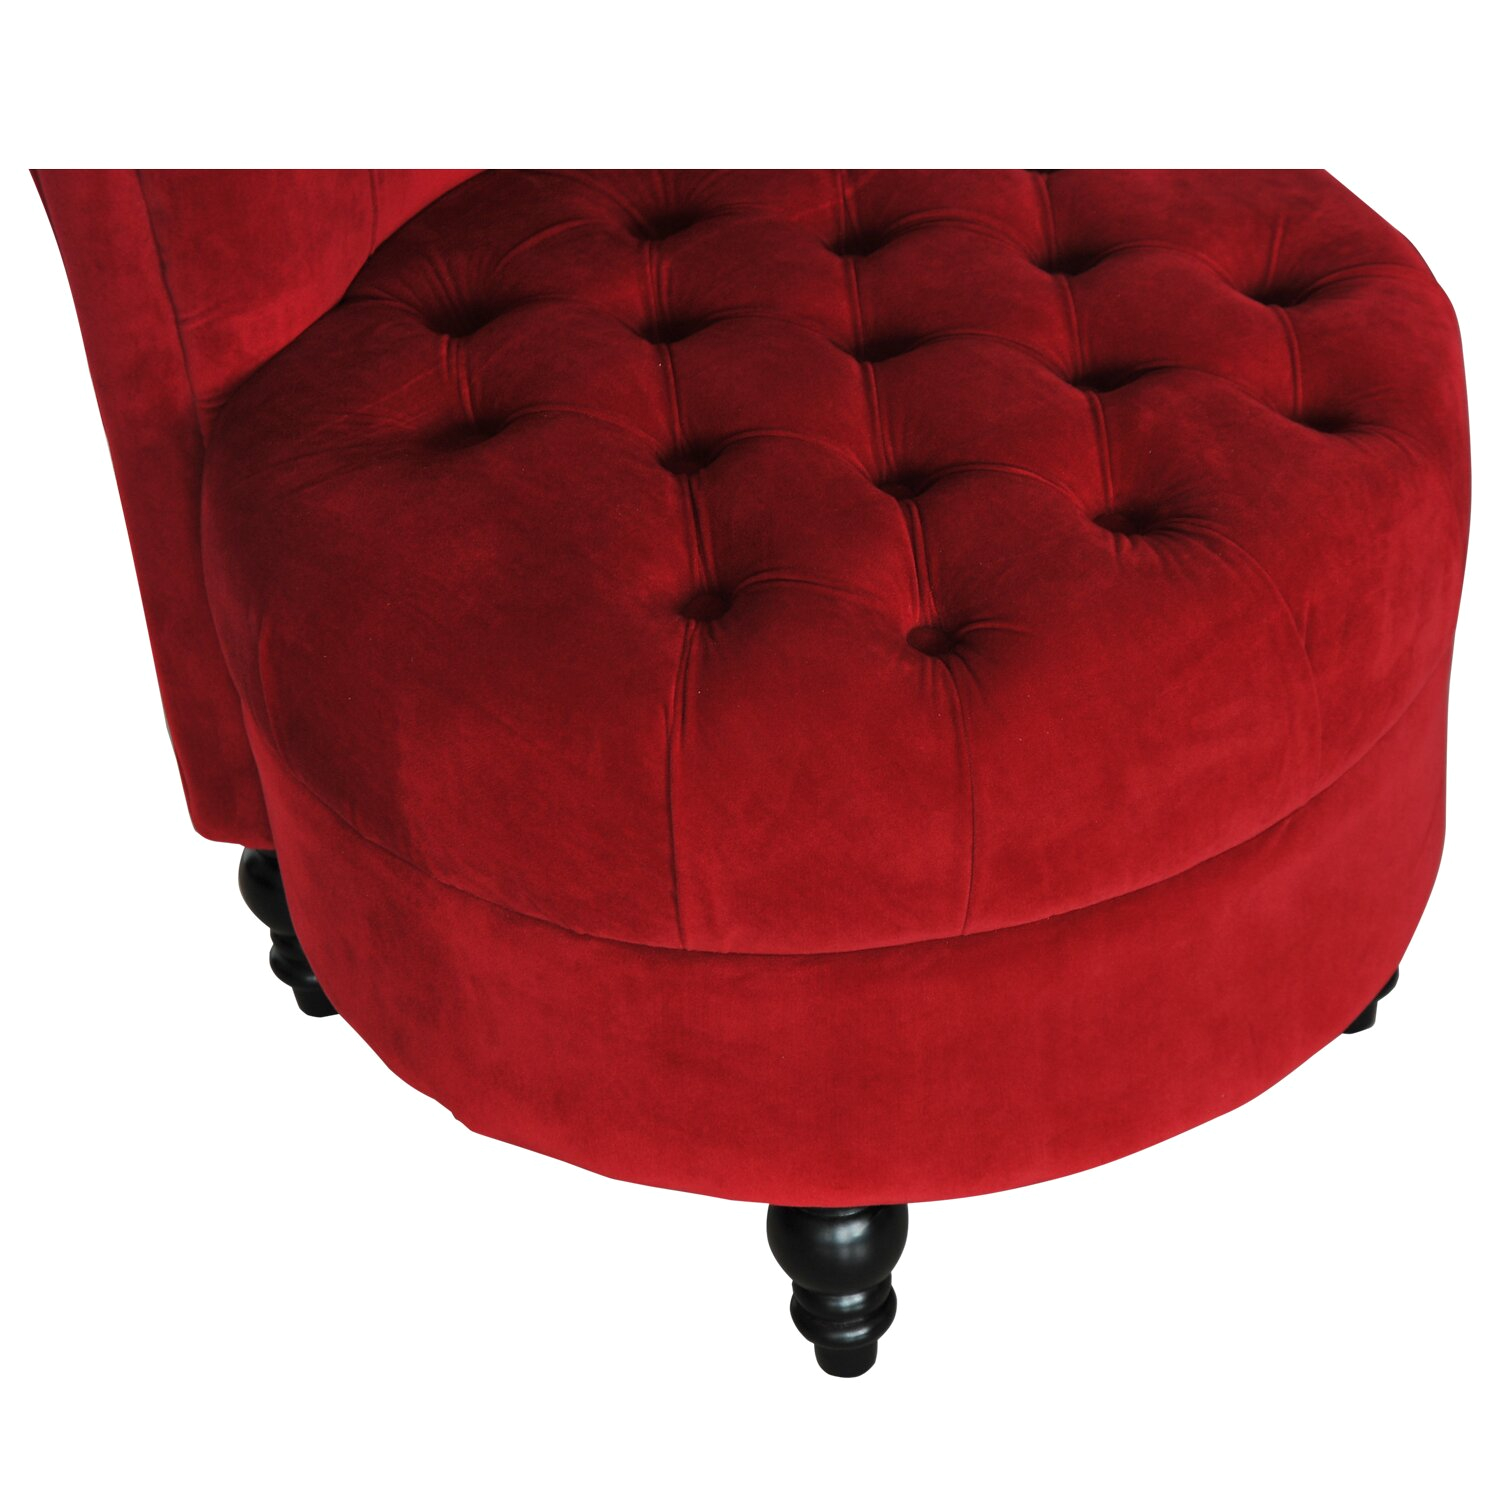 Hom 45 Tufted High Back Velvet Accent Chair Red 02 0681 HMCO1011